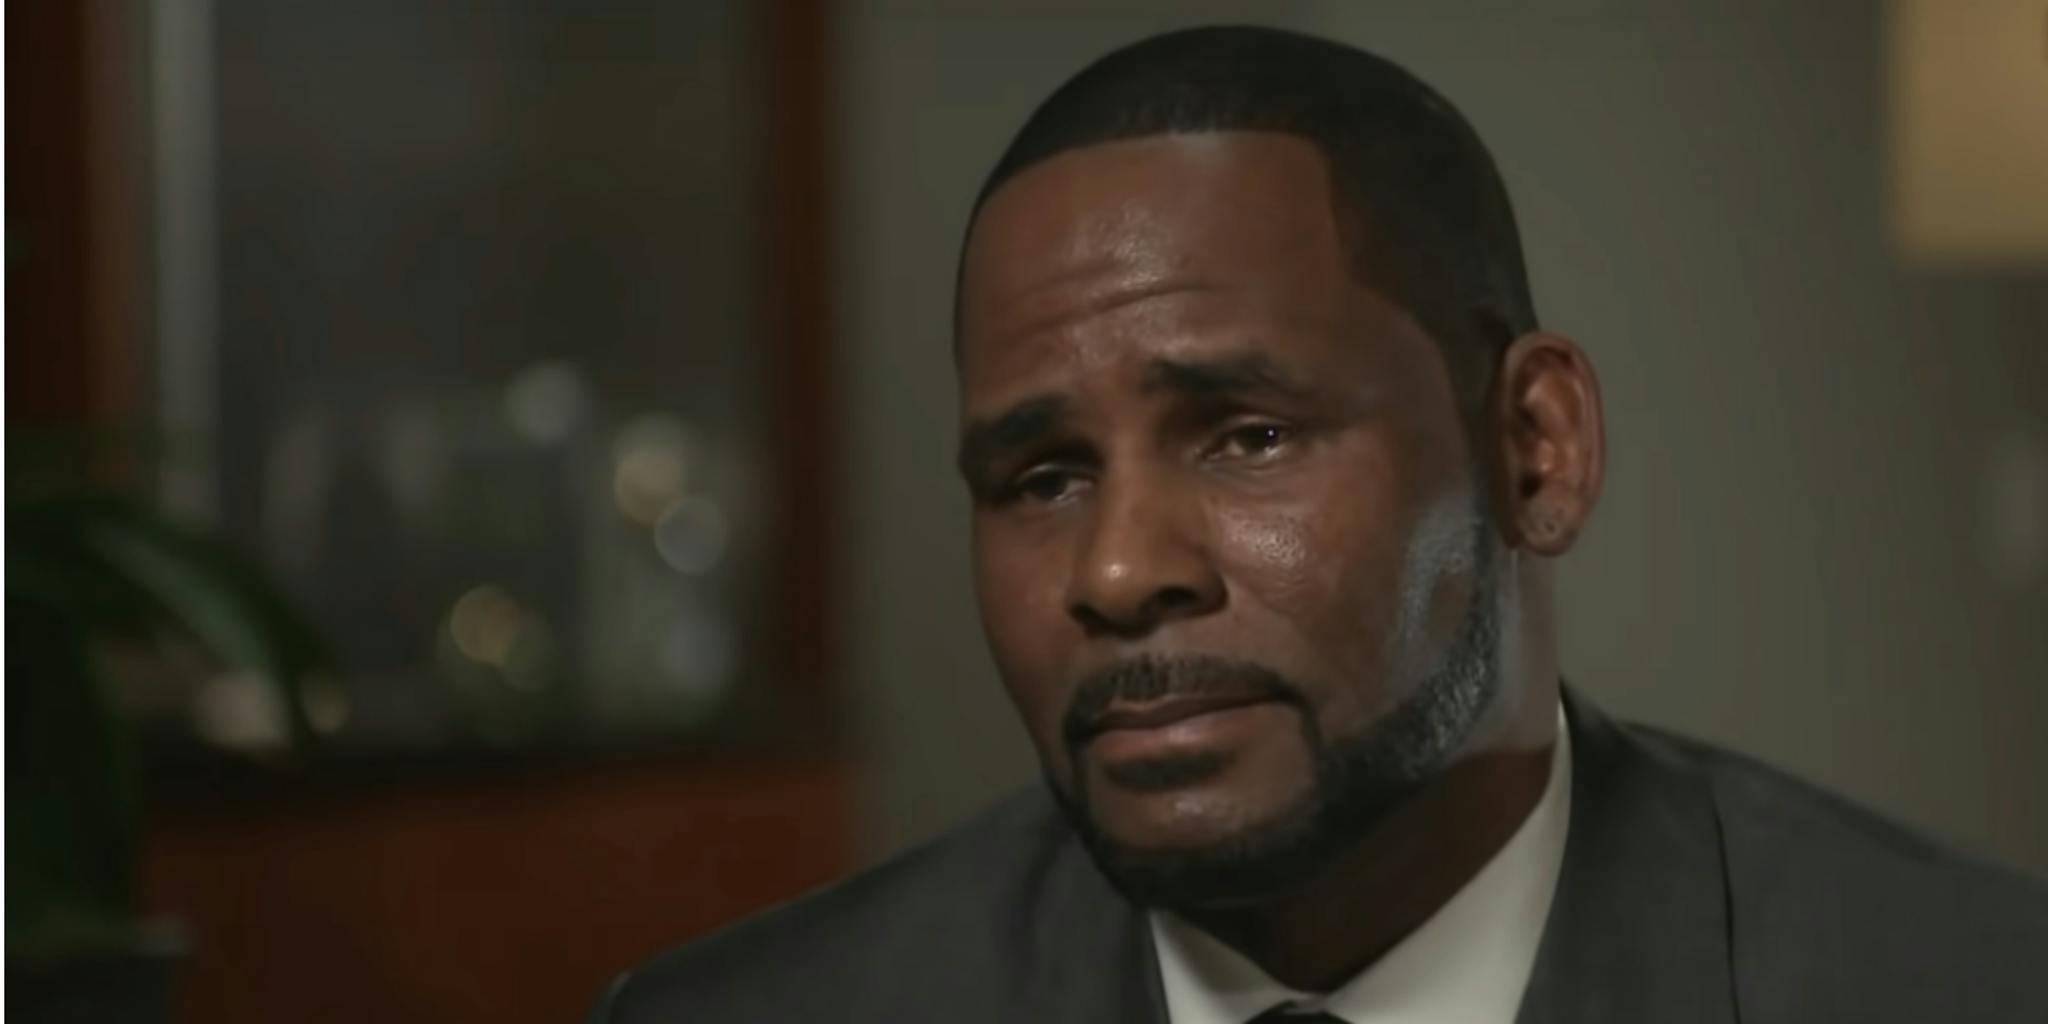 R Kelly Arrested On 13 New Federal Sex Crime Charges